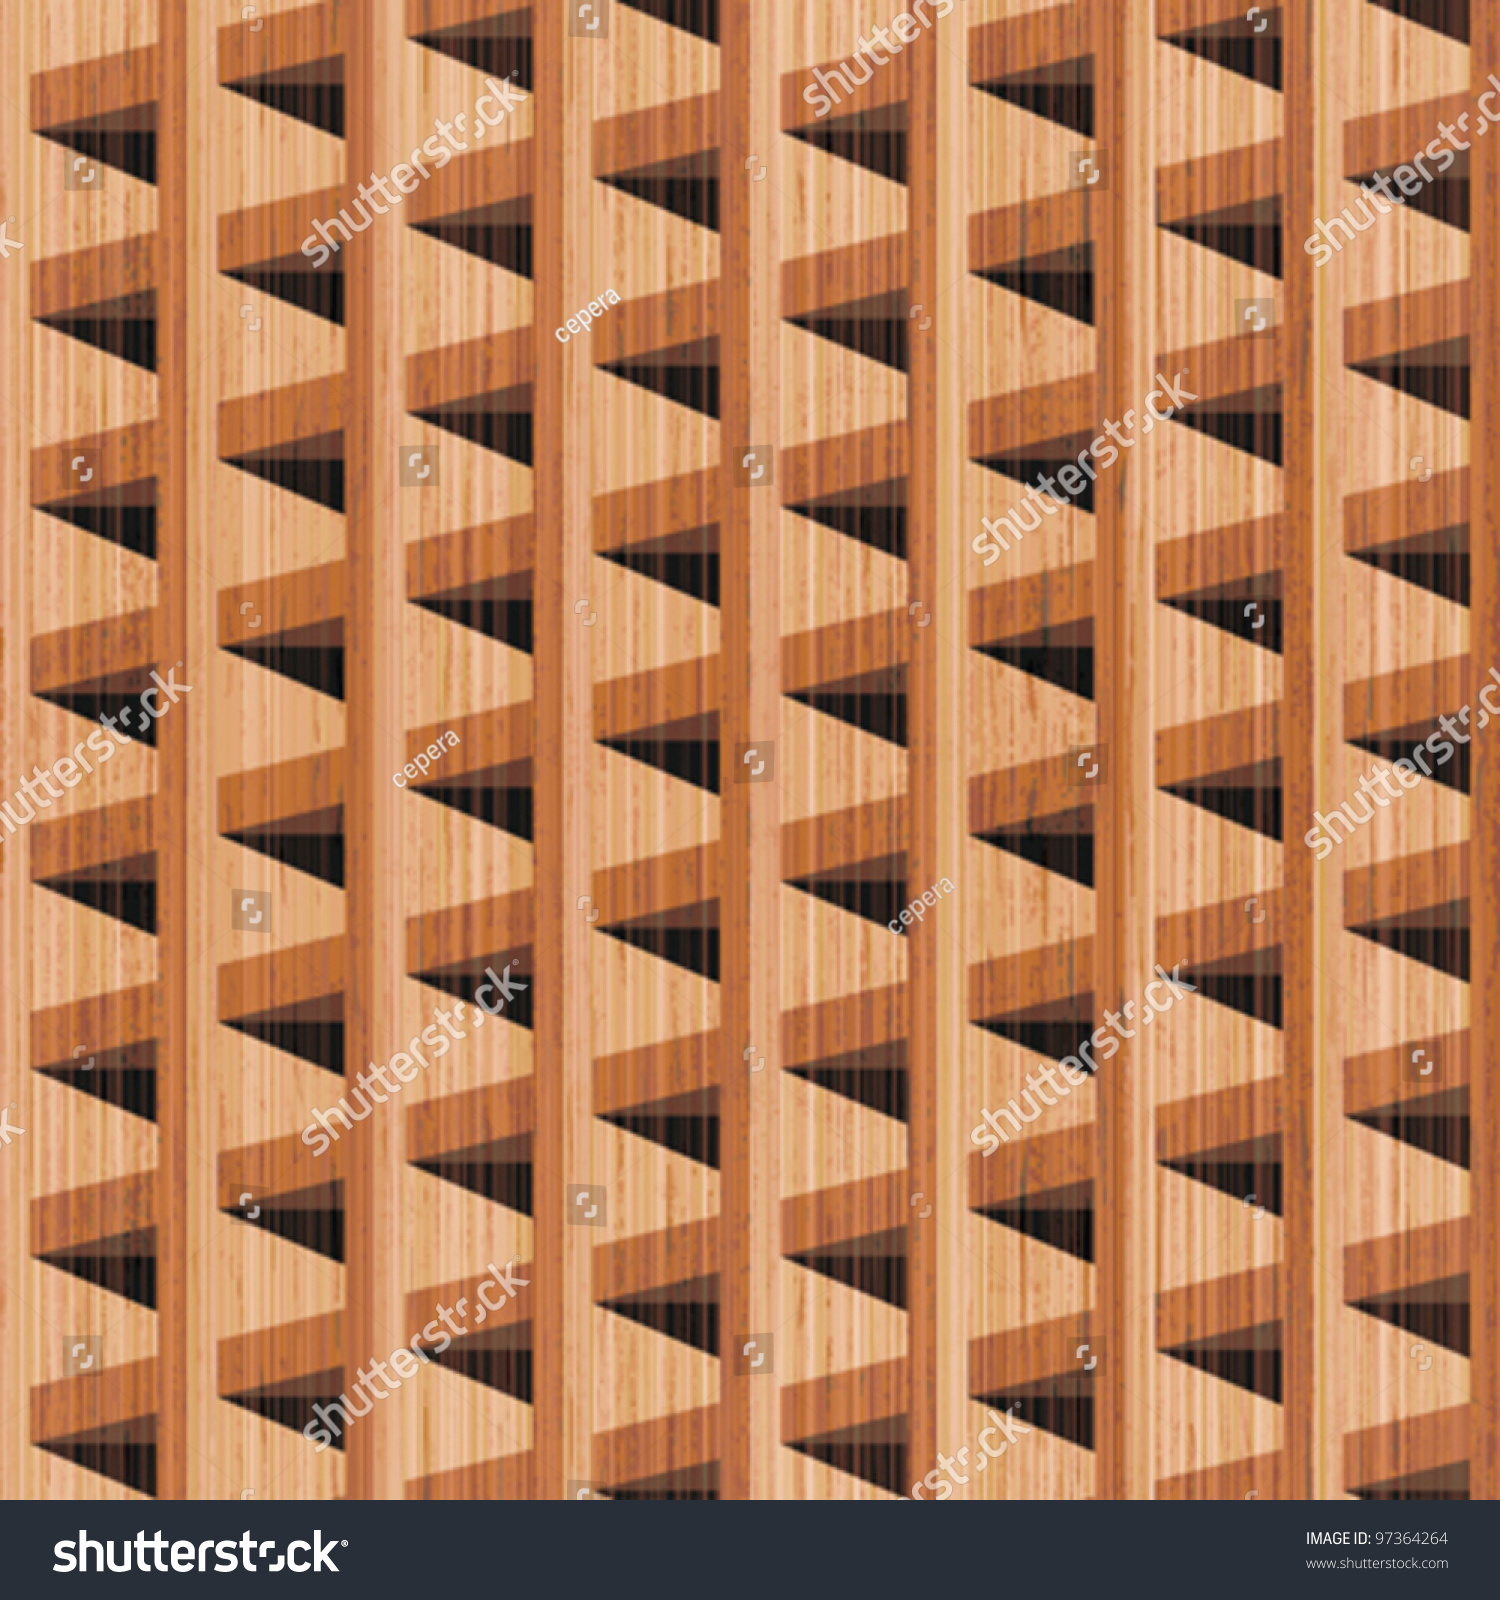 Abstract Wooden Textured Building Blocks Background Stock Vector ...